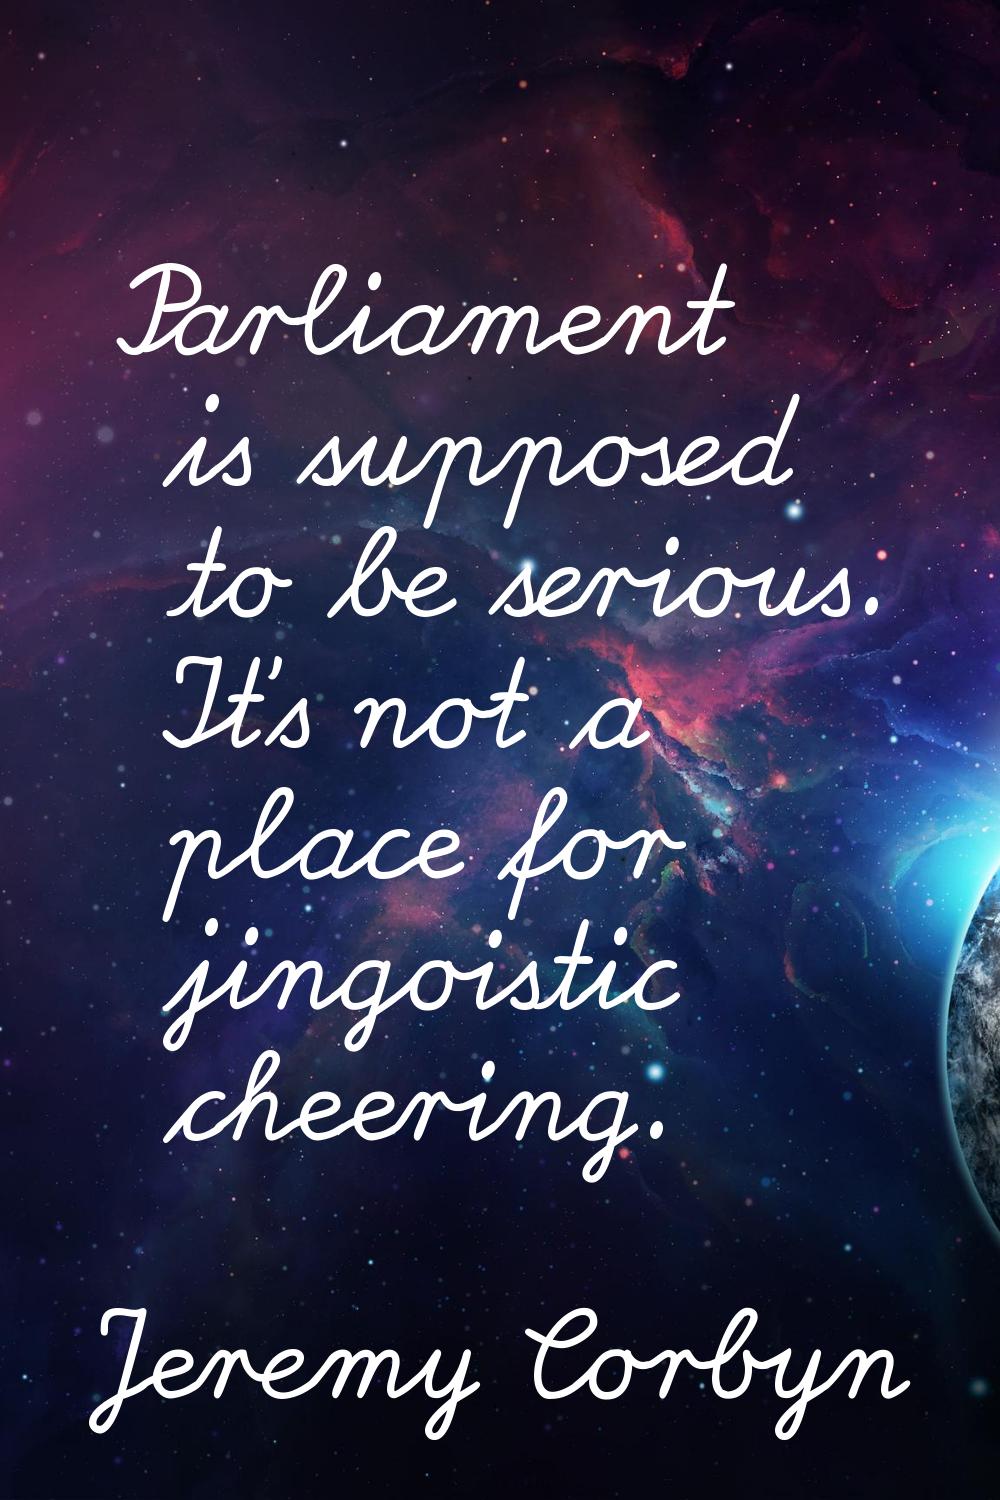 Parliament is supposed to be serious. It's not a place for jingoistic cheering.